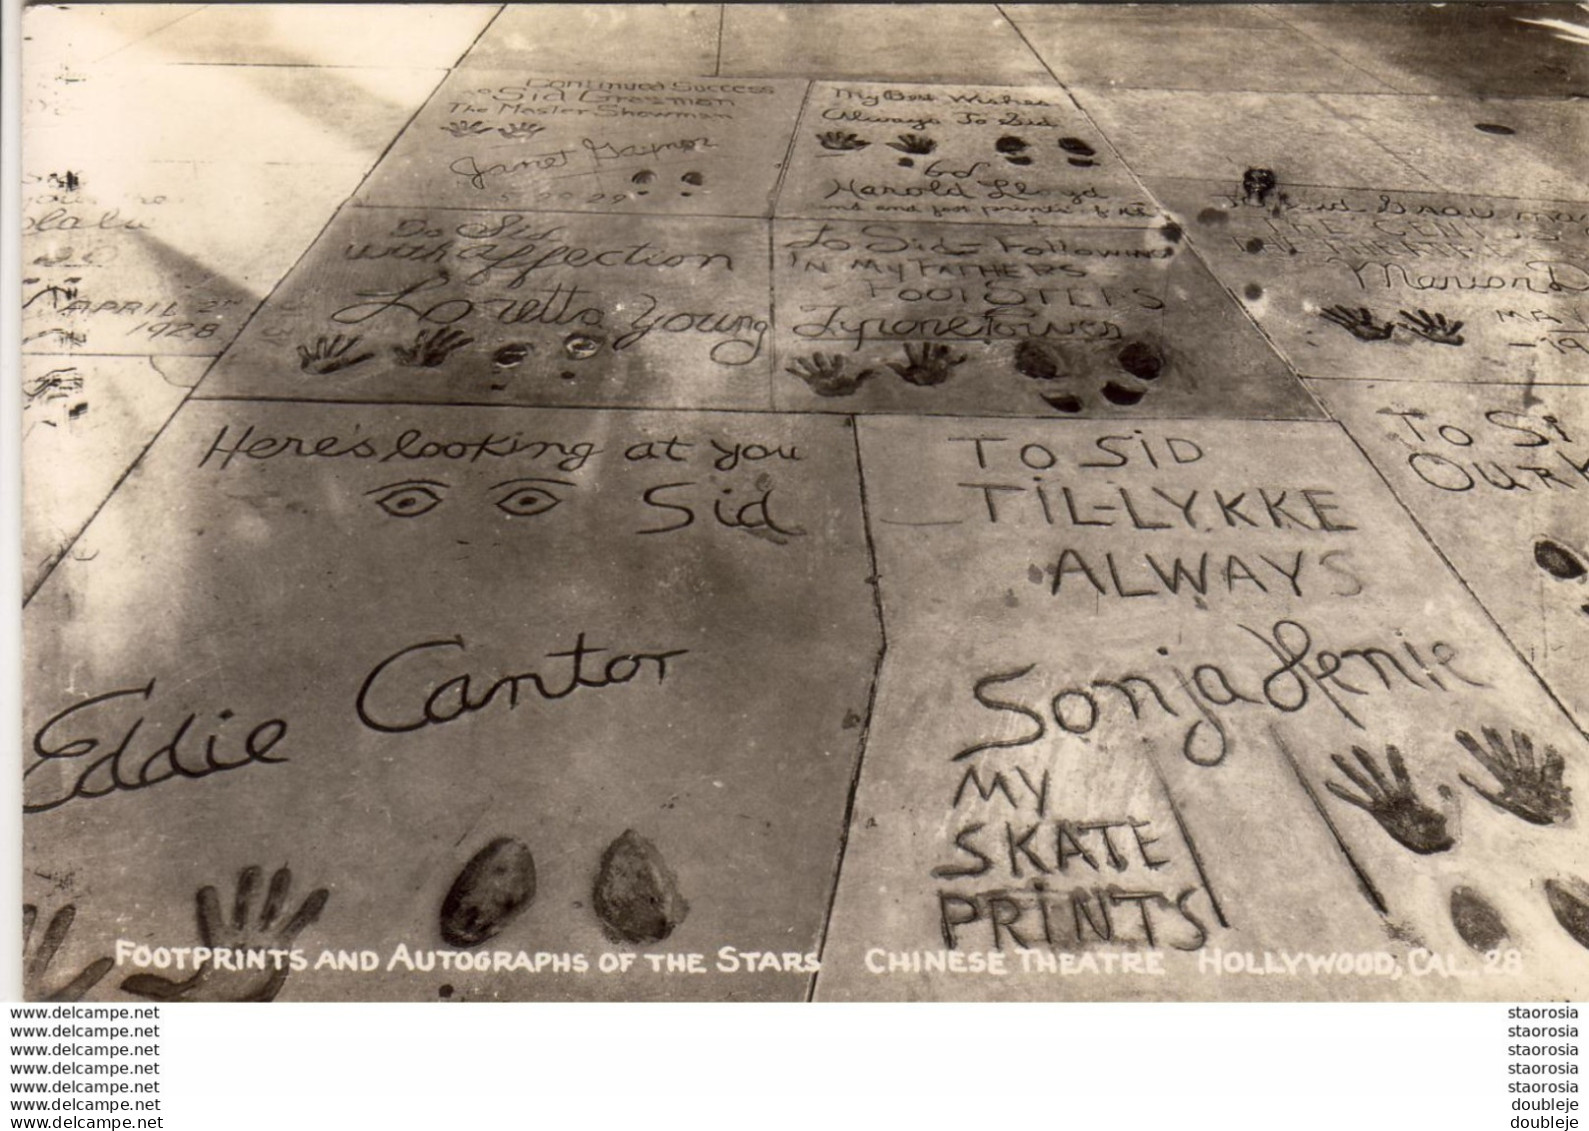 FOOTPRINTS AND AUTOGRAPHS OF THE STARS - CHINESE THEATRE HOLLYWOOD CAL - Los Angeles